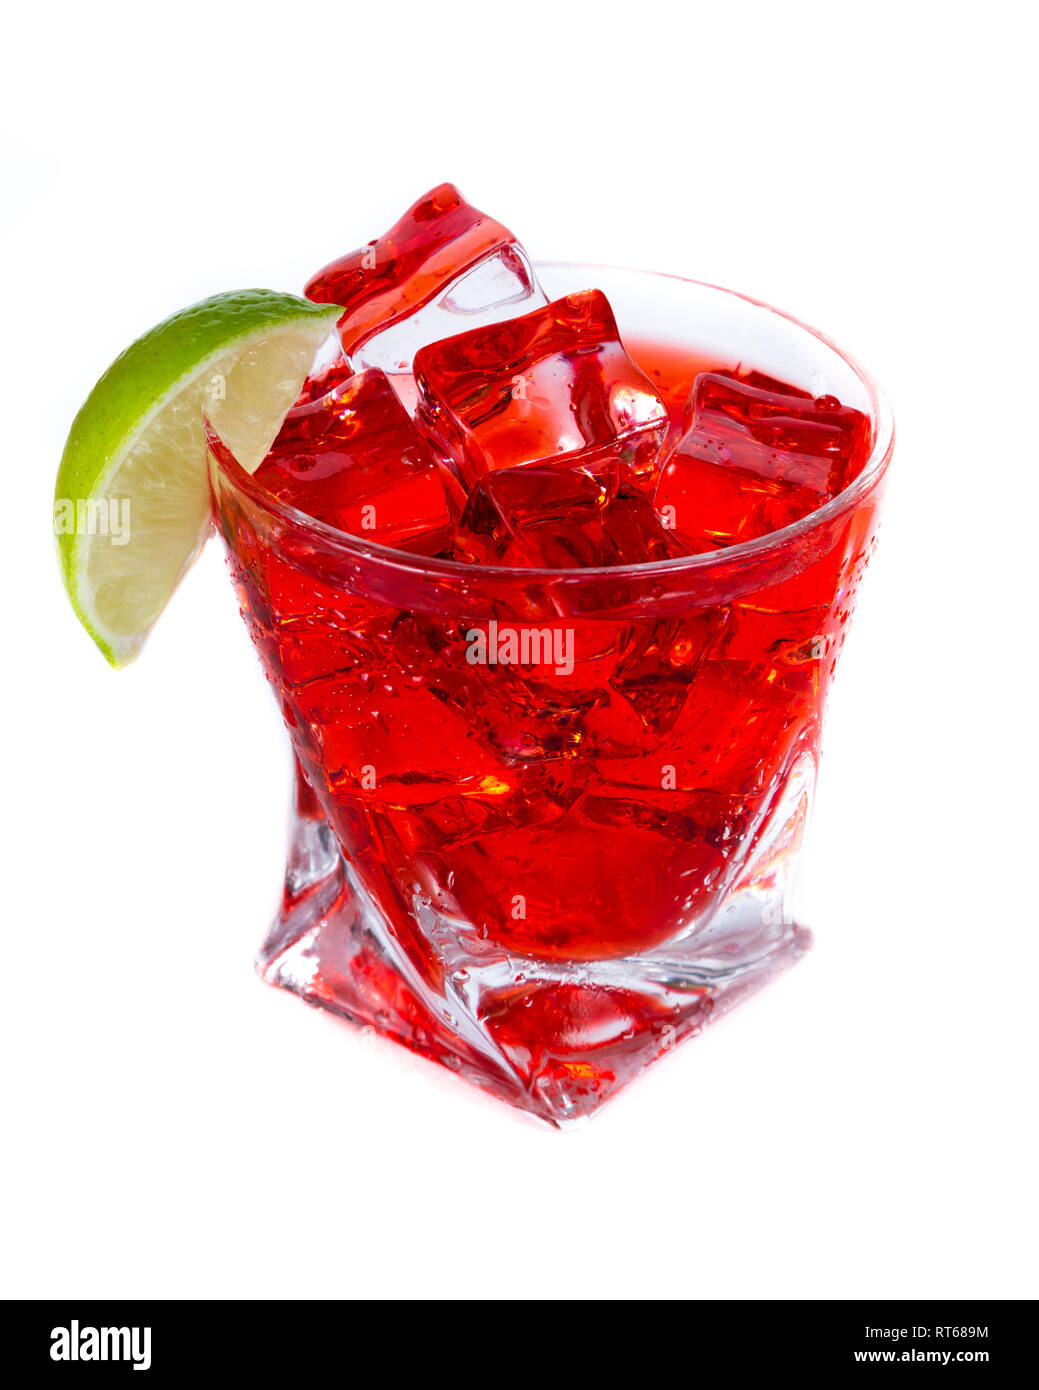 close up of a refreshing classic cocktail with vodka and cranberry juice served on the rocks with a lime wedge garnish isolated on a white background Stock Photo